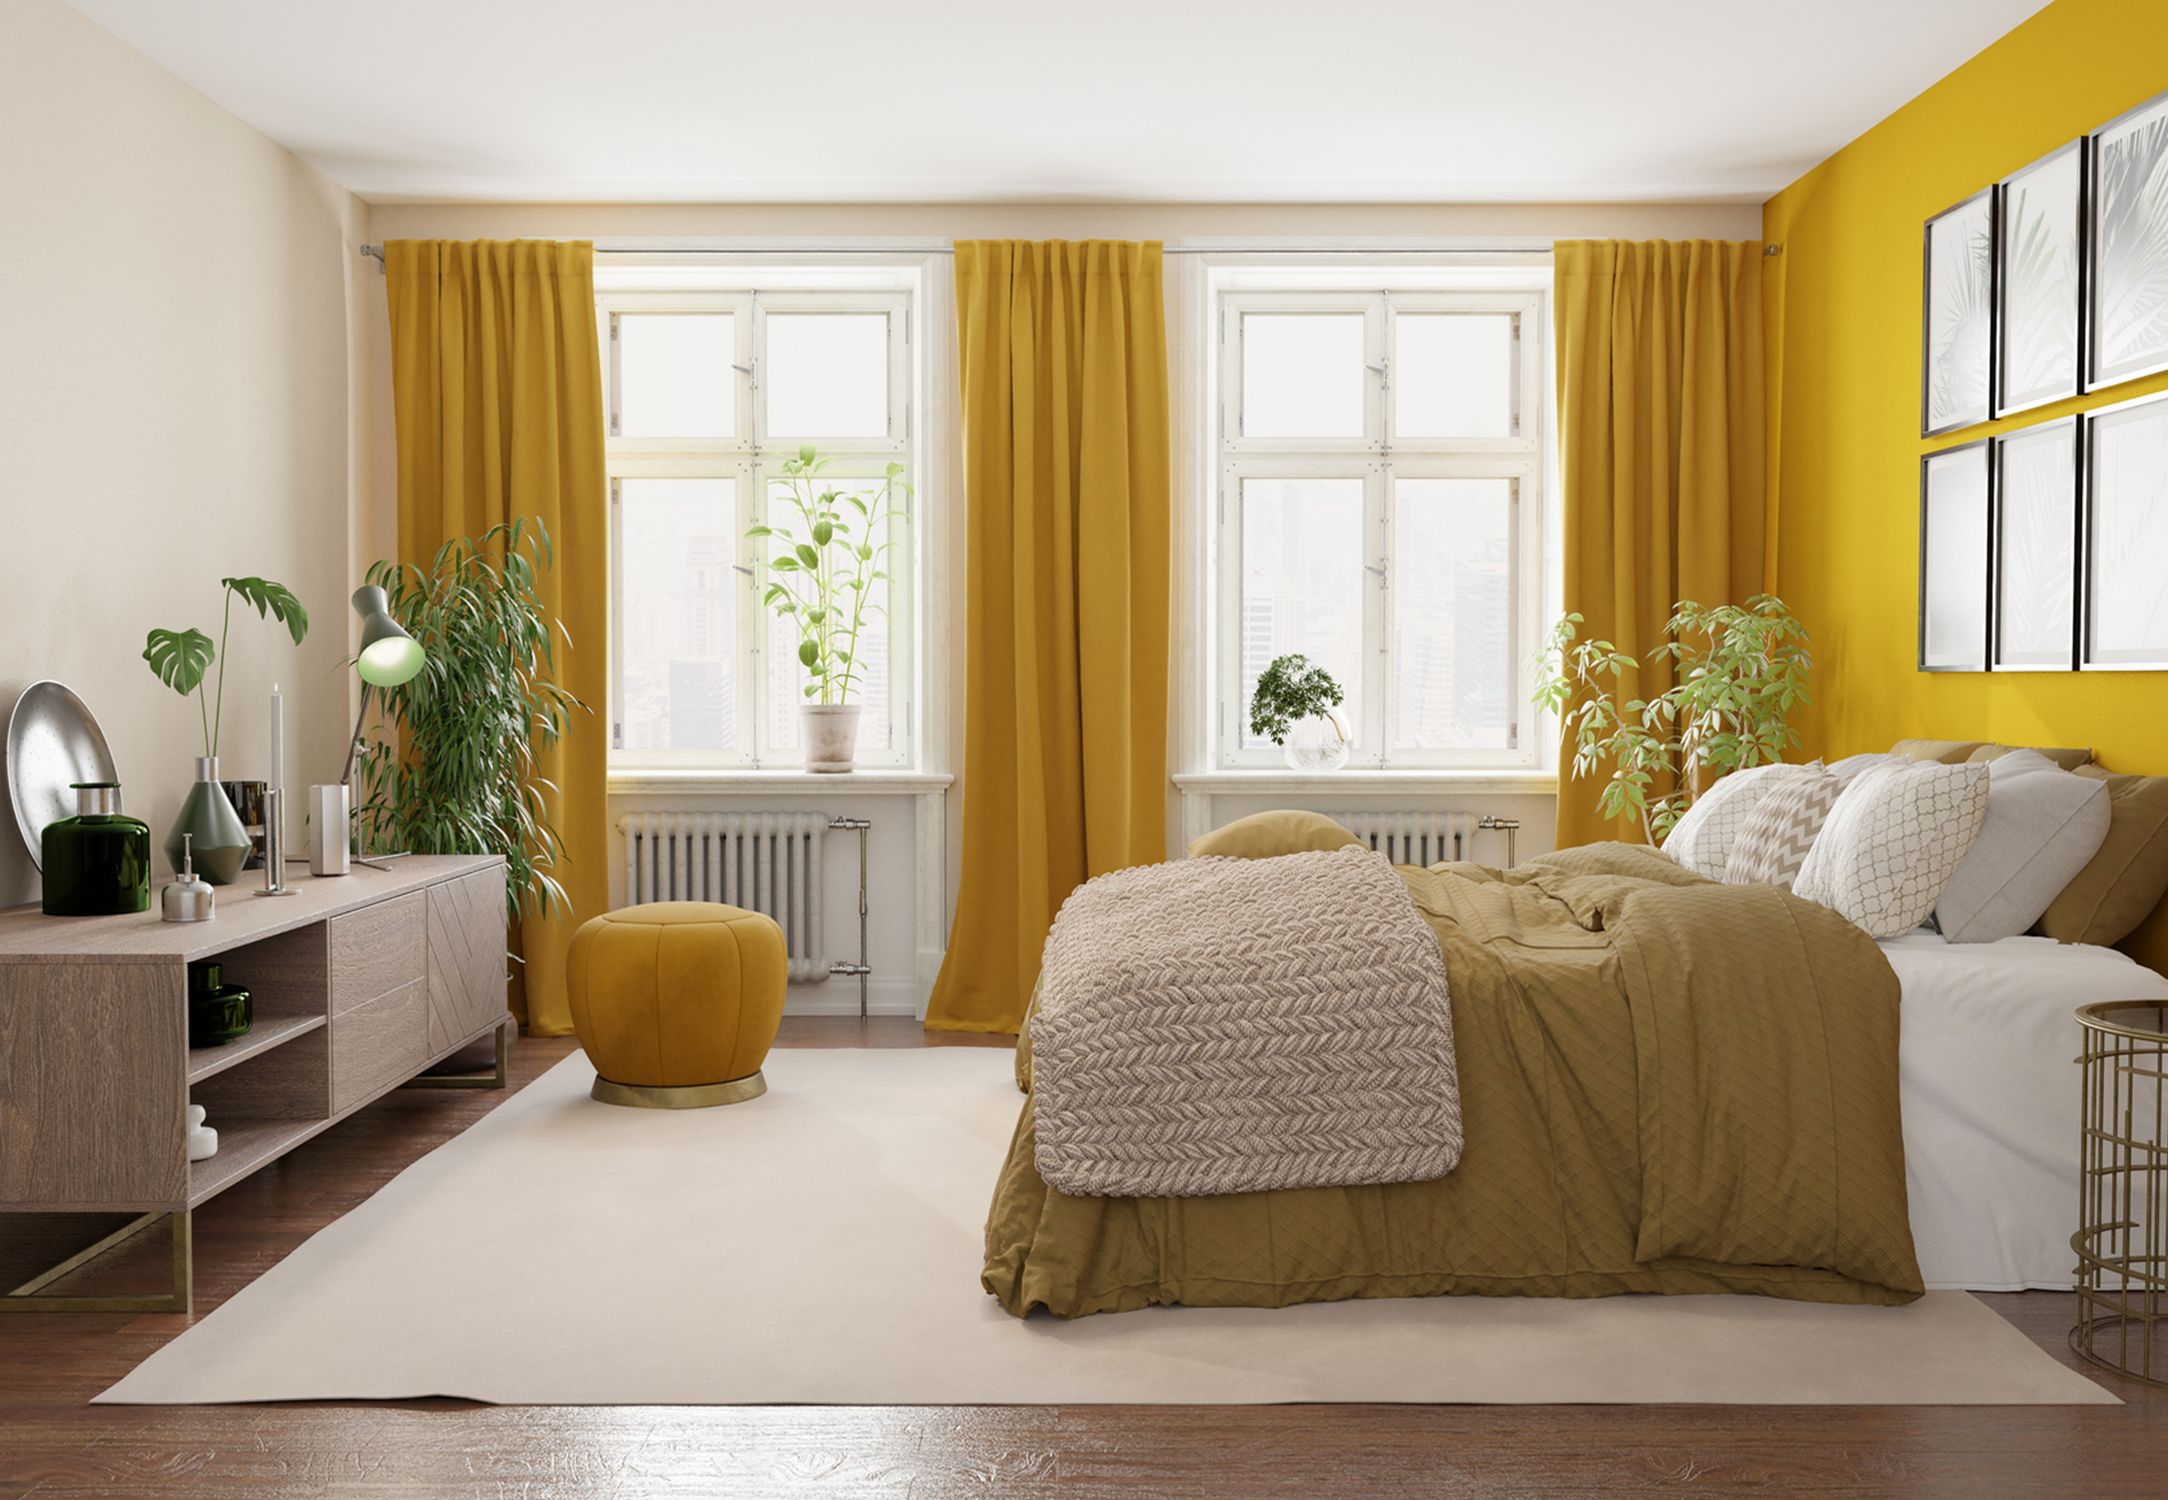 Yellow curtains